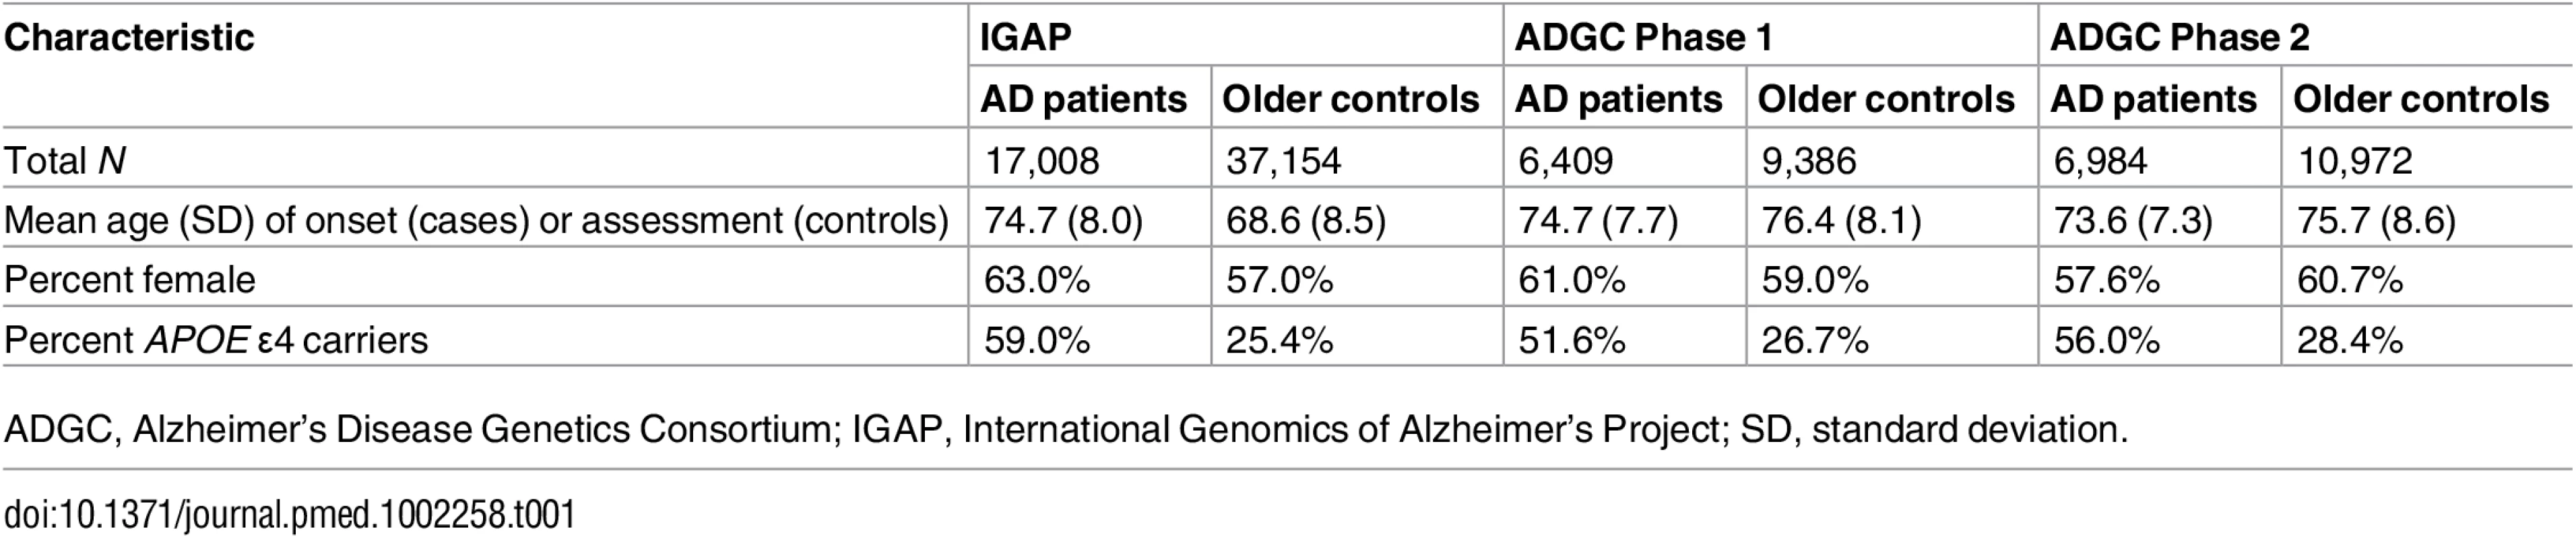 Demographic data for AD patients and older controls.